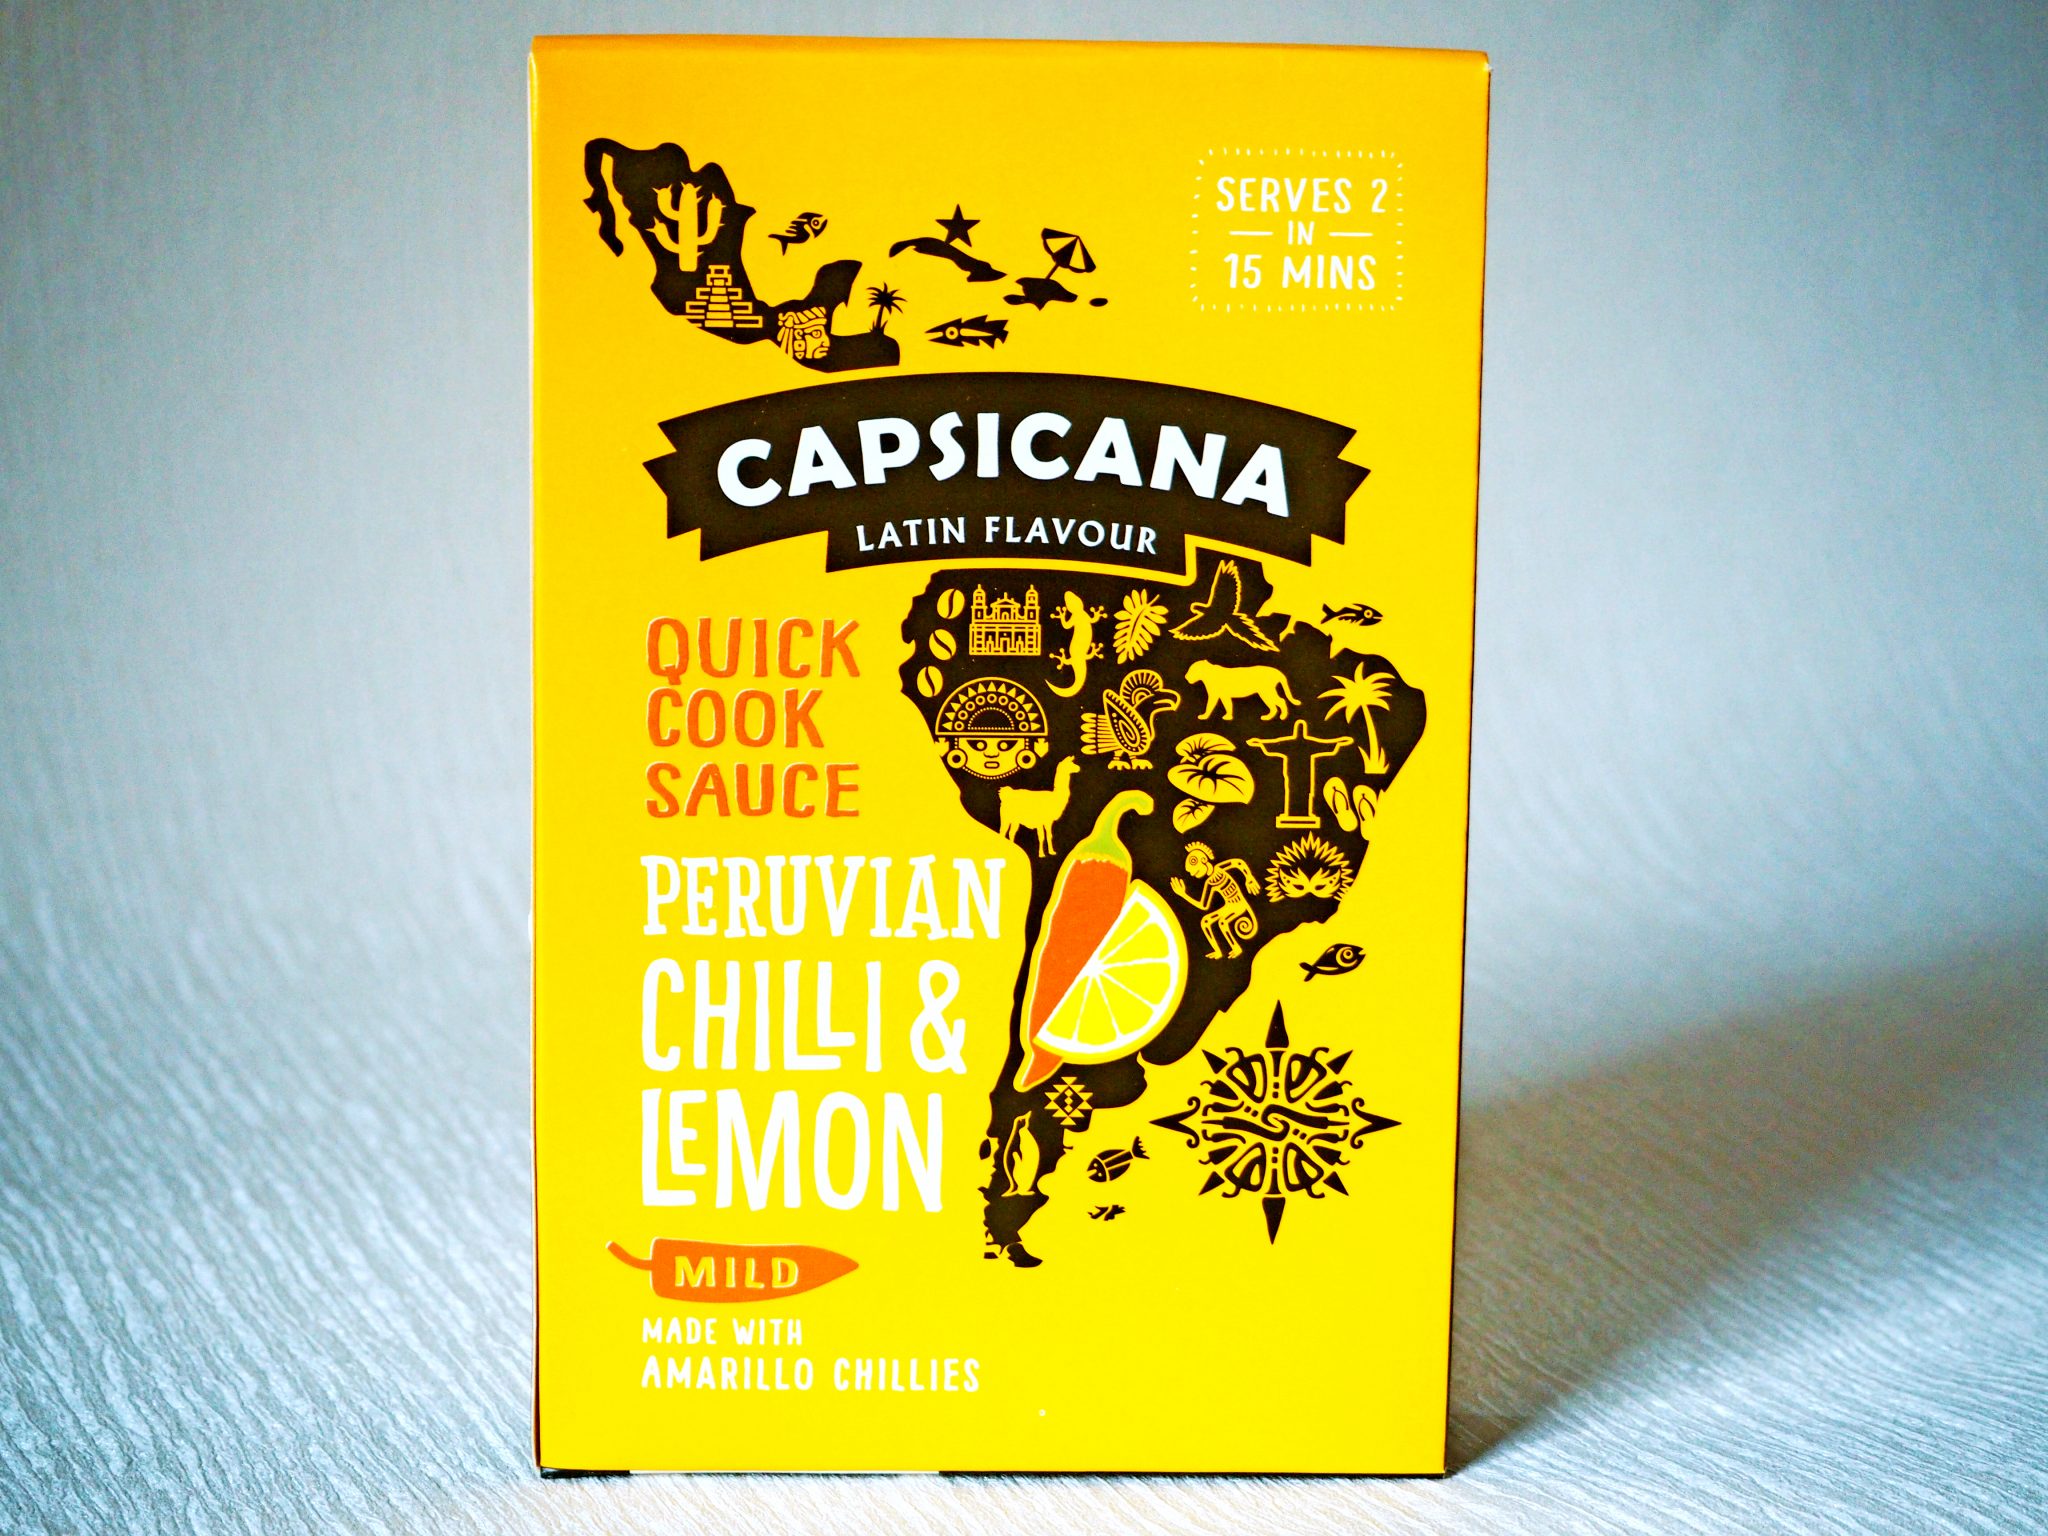 Laura Kate Lucas - Manchester Fashion, Food and Lifestyle Blogger | Capsicana Quick Cook Sauce Review and Recipe